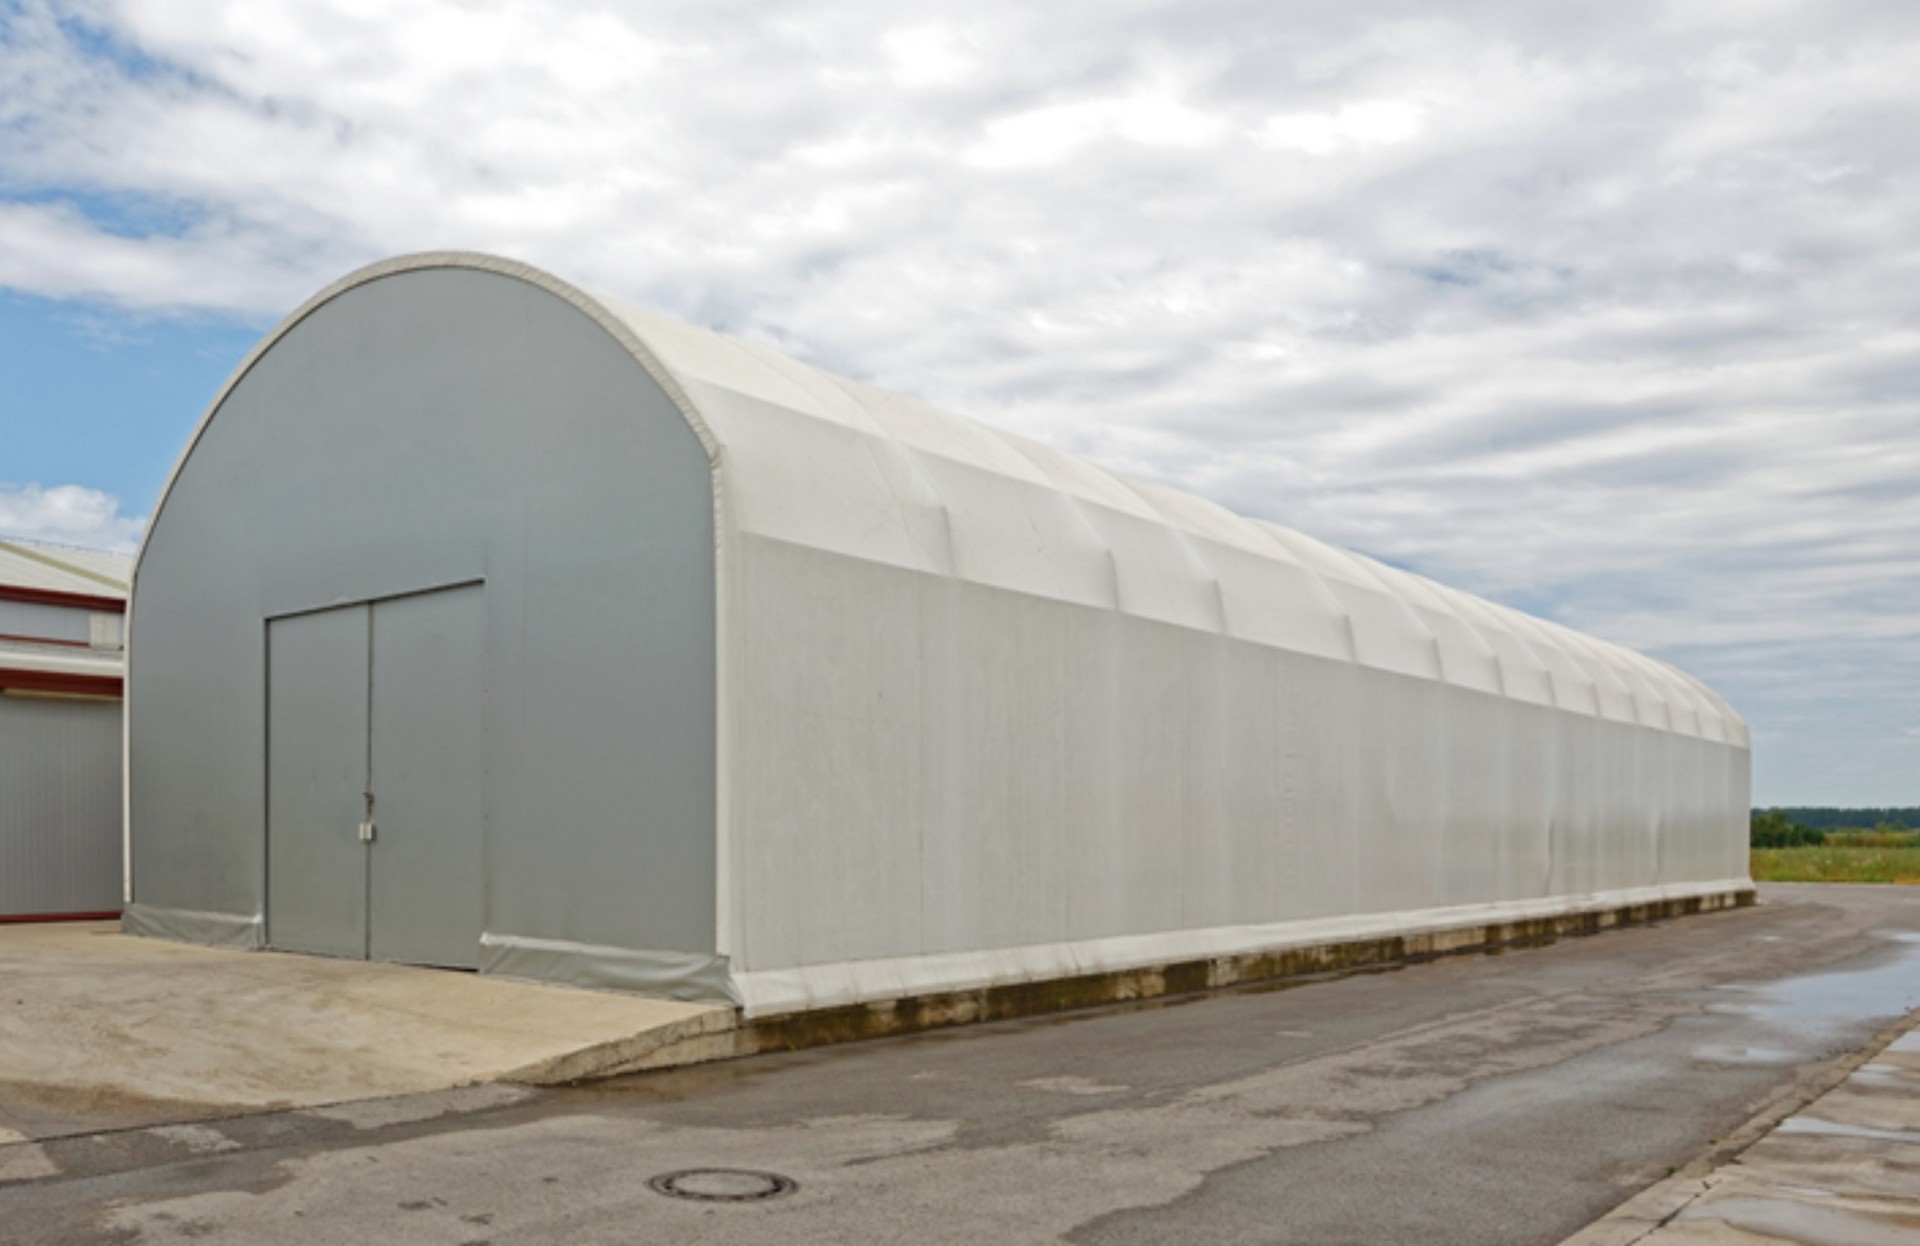 Hangar Shelters and Domes